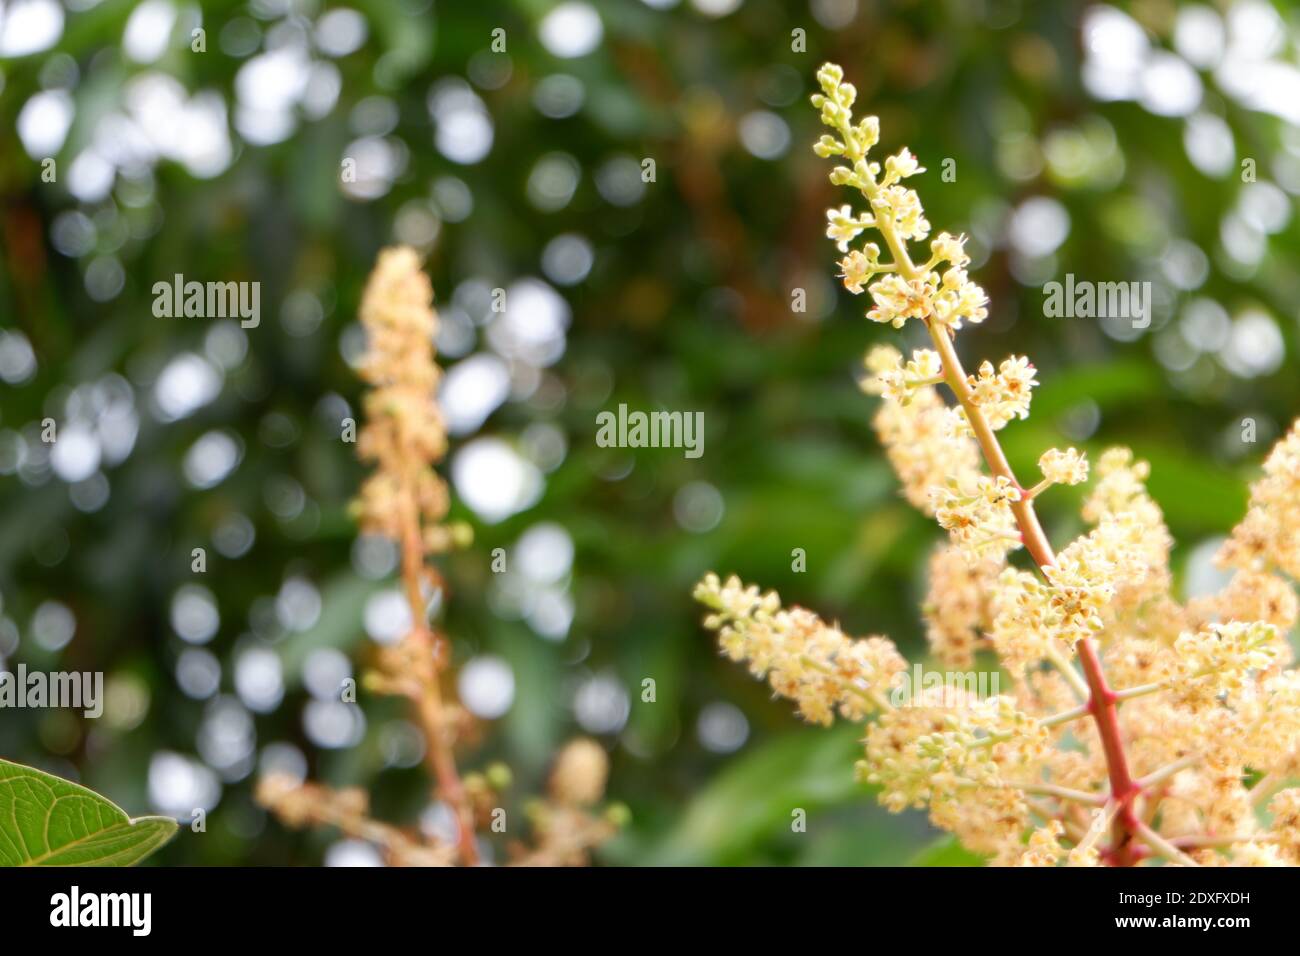 Close-up Of Flowering Plant Against Blurred Background Stock Photo